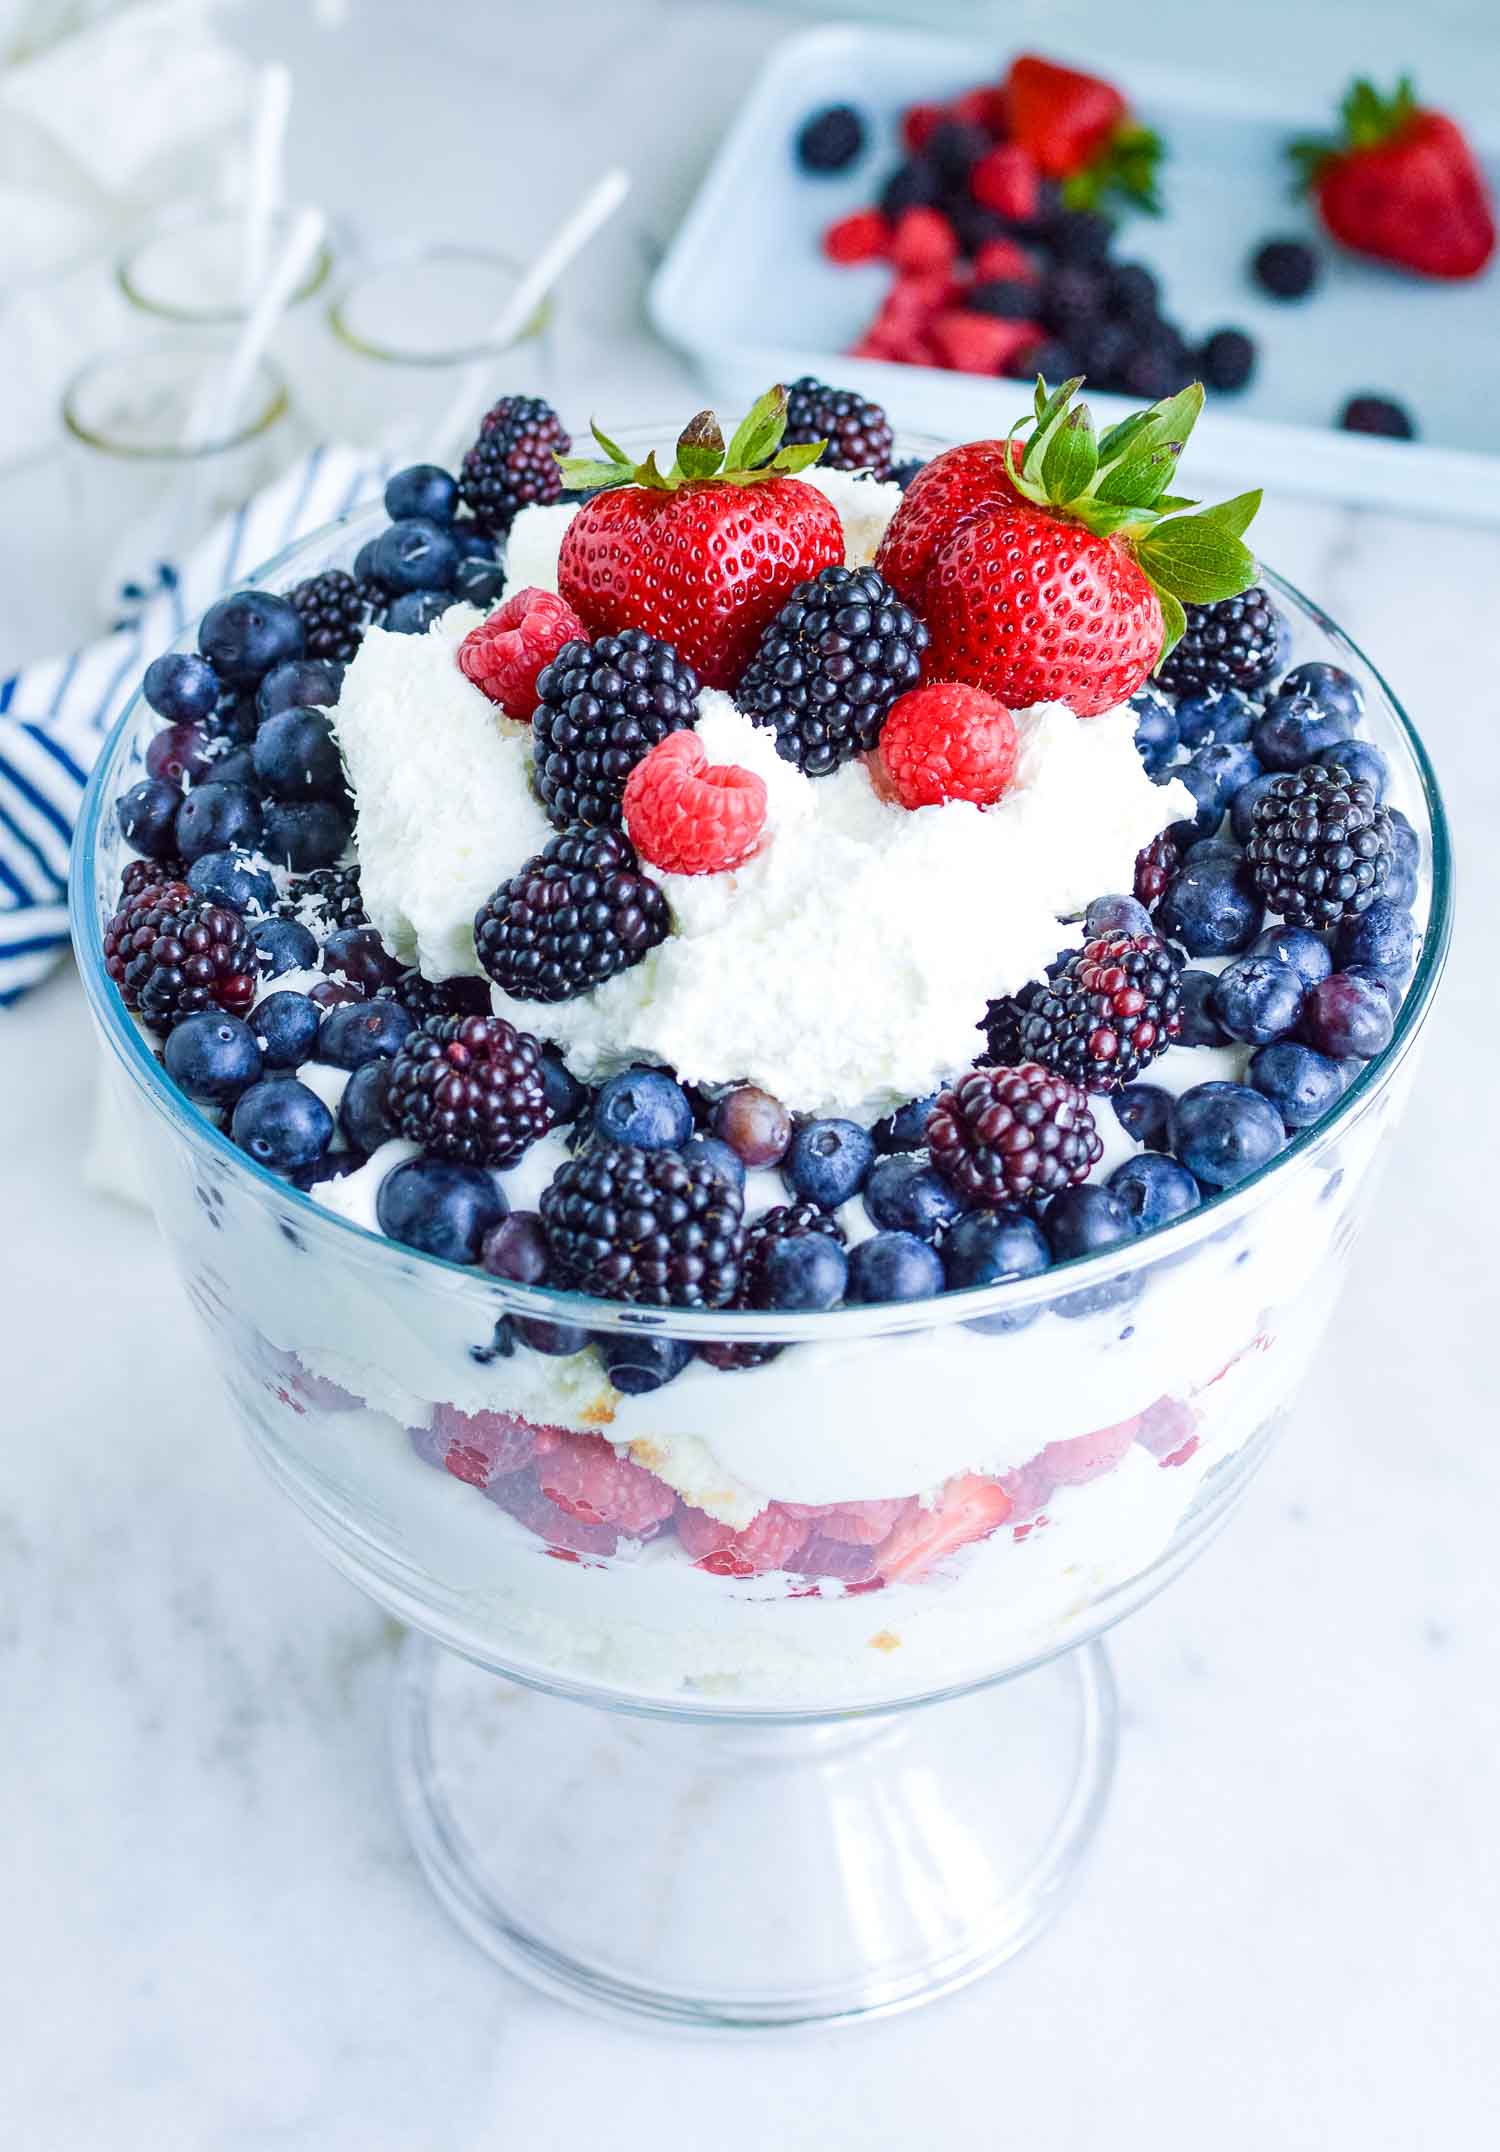 A clear glass dish filled with cake, berries, and cream with a blue and white towel behind it with a plate of extra berries and three empty glass cups with white spoons in them.